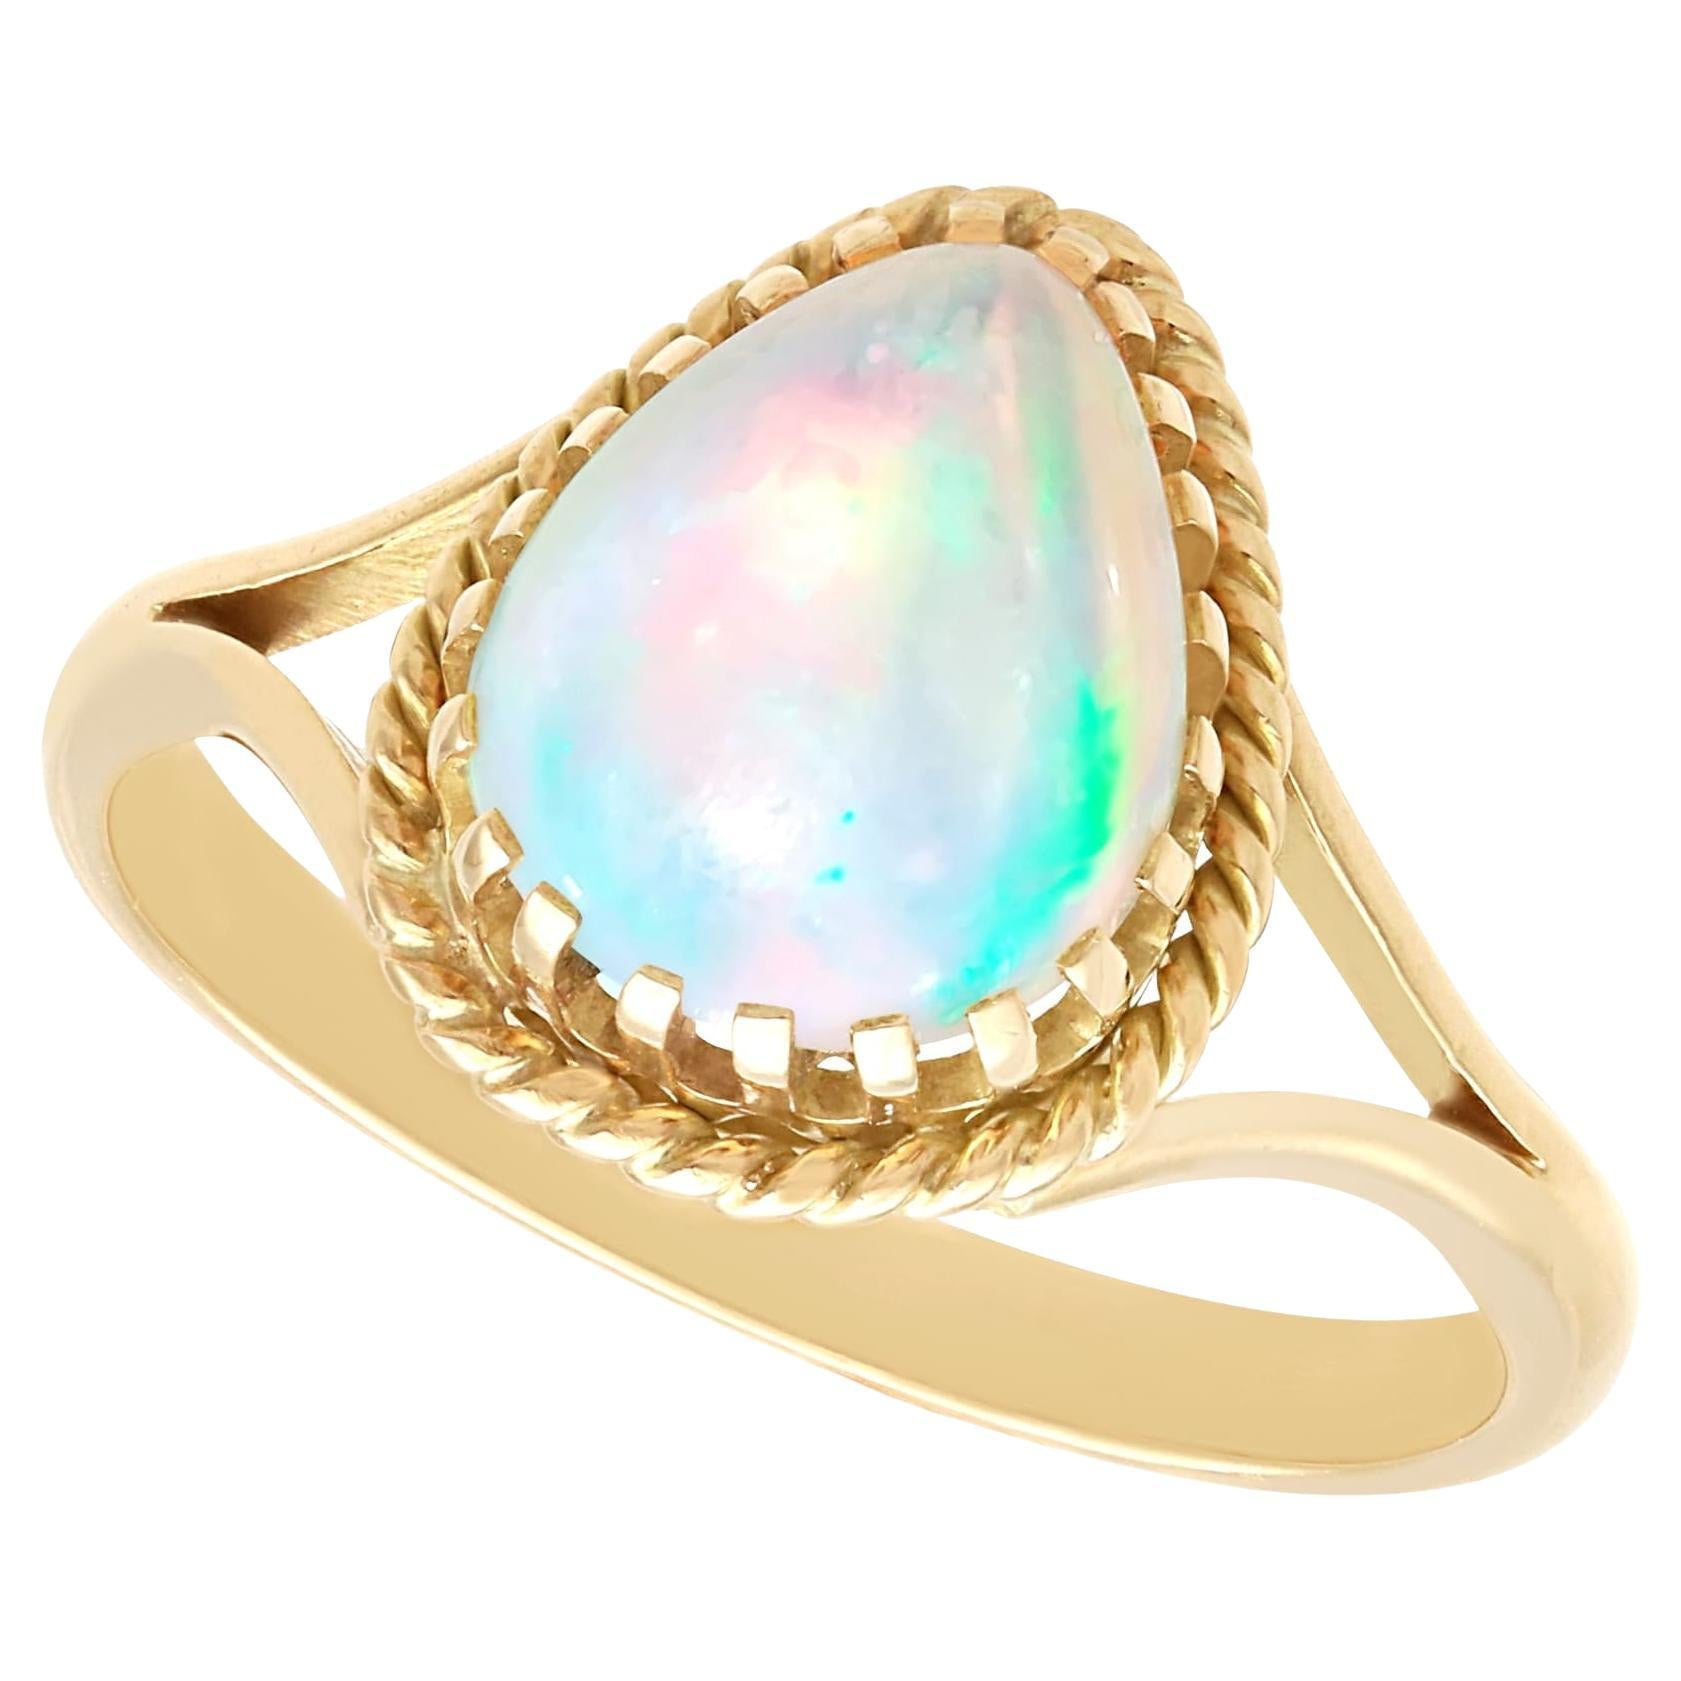 Vintage 1.80ct Opal and 9k Yellow Gold Ring